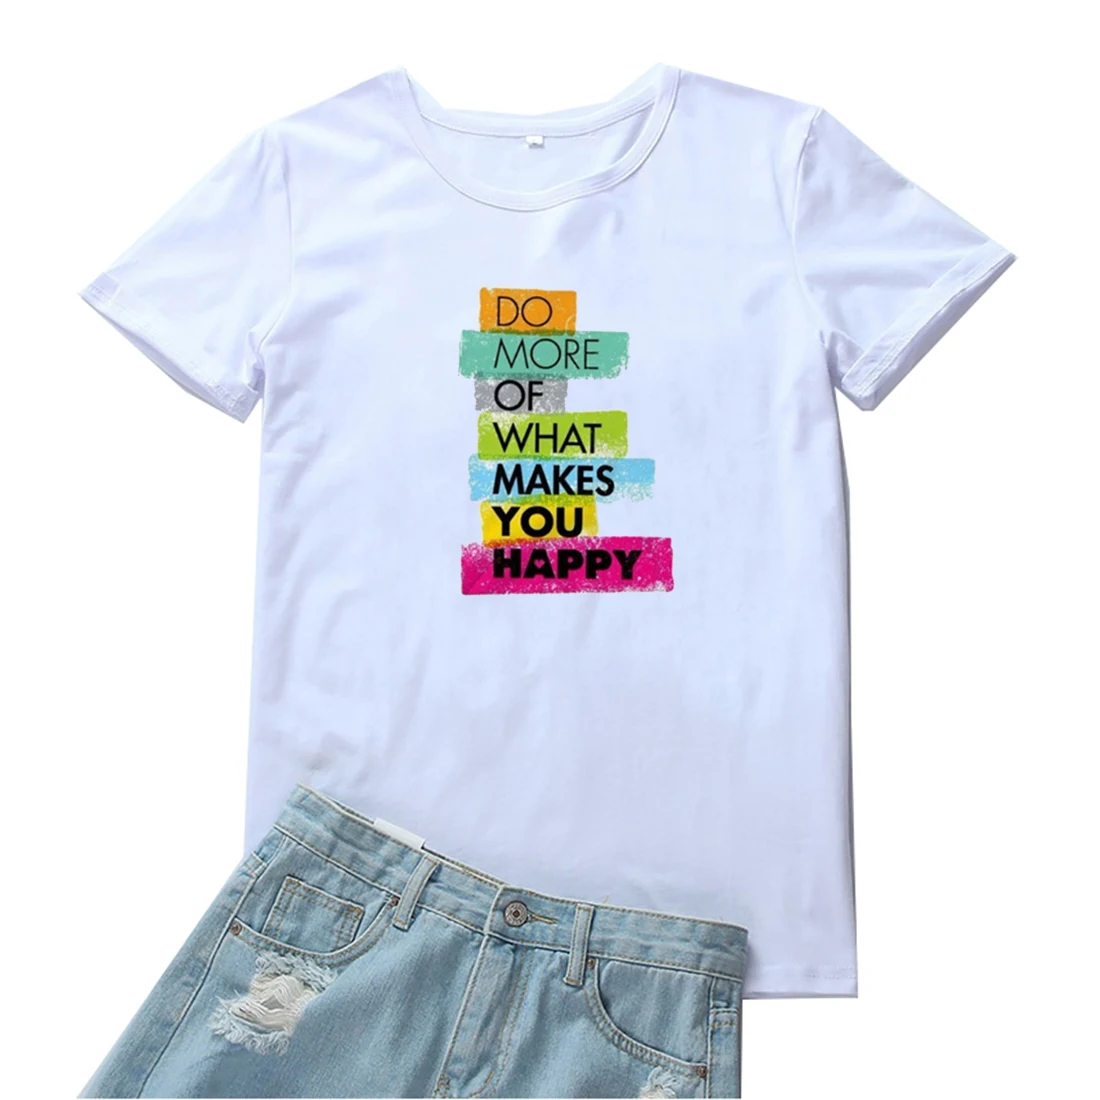 

Do More of What Makes You Happy T Shirt Women Fashion Print Graphic T-shirts Women Casual Short Sleeves Clothes Women Tshirt Top